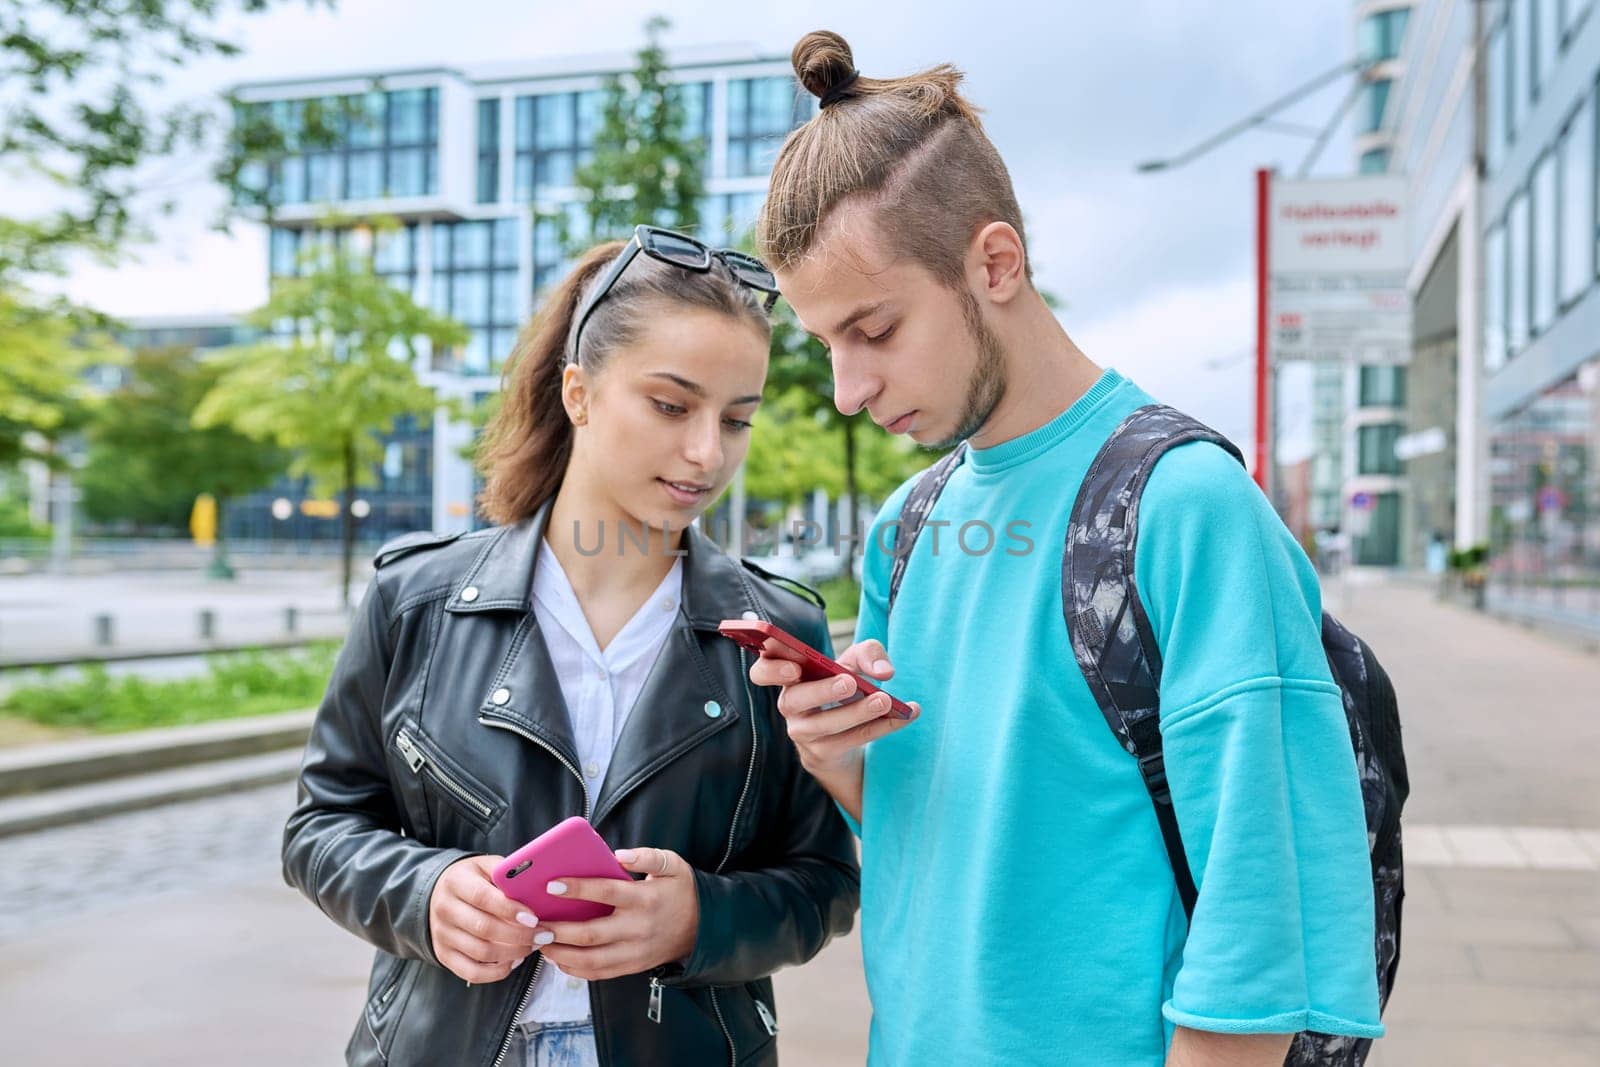 Teen friends guy and girl standing together holding smartphones looking at screen using mobile phones outdoor on city street. Internet digital technology applications for leisure study communication